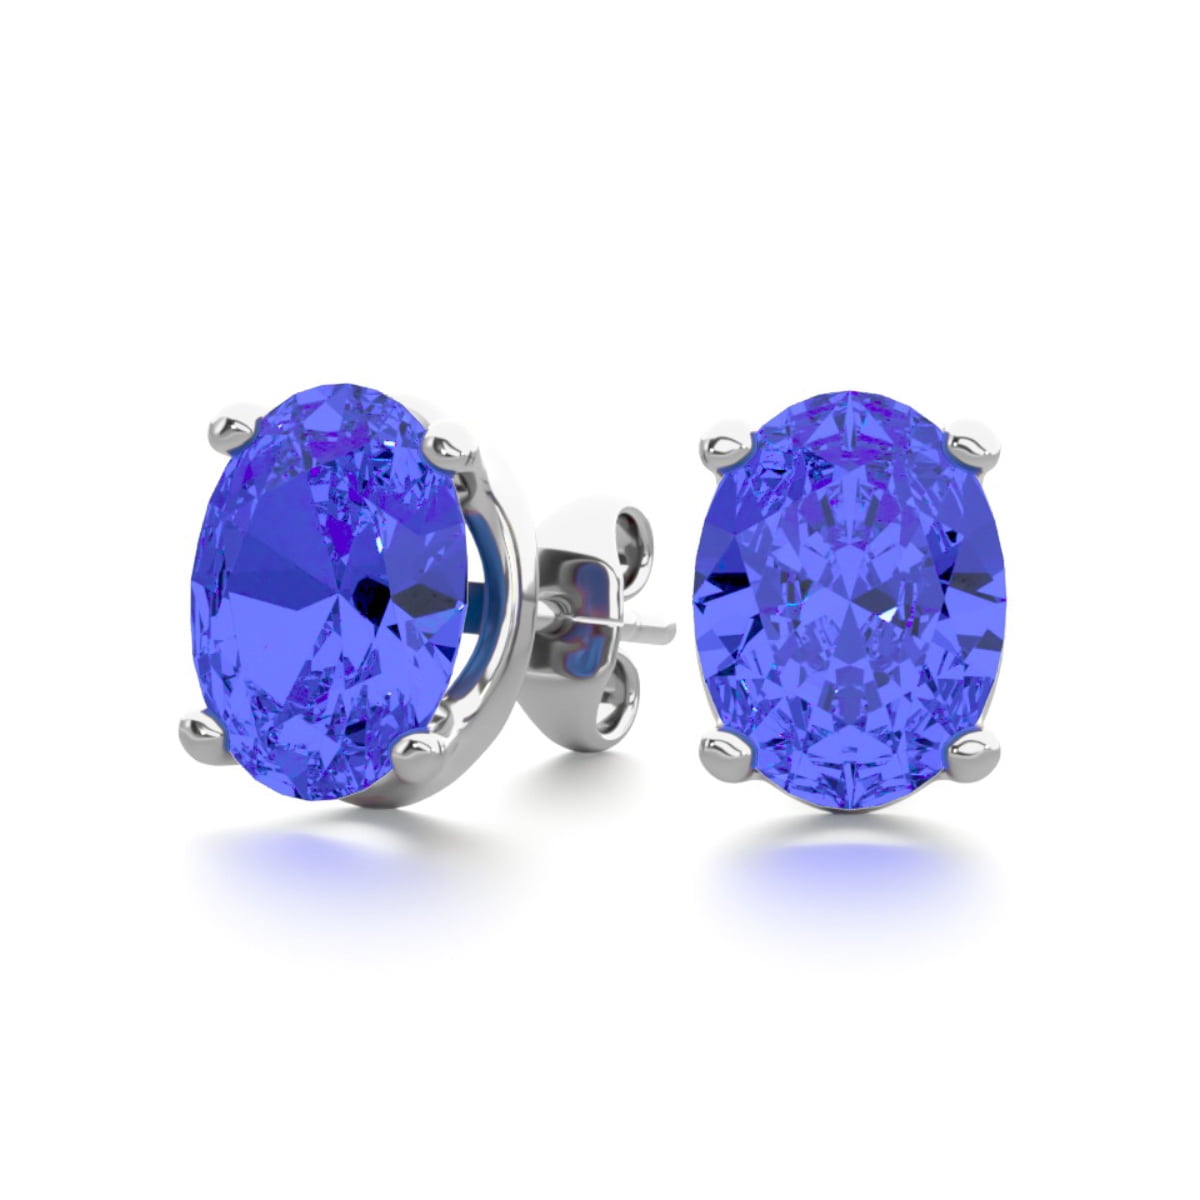 Gem Stone King 0.24 Ct Round 3mm Blue Tanzanite 14K Yellow Gold Stud Earrings with Cultured Freshwater Pearls